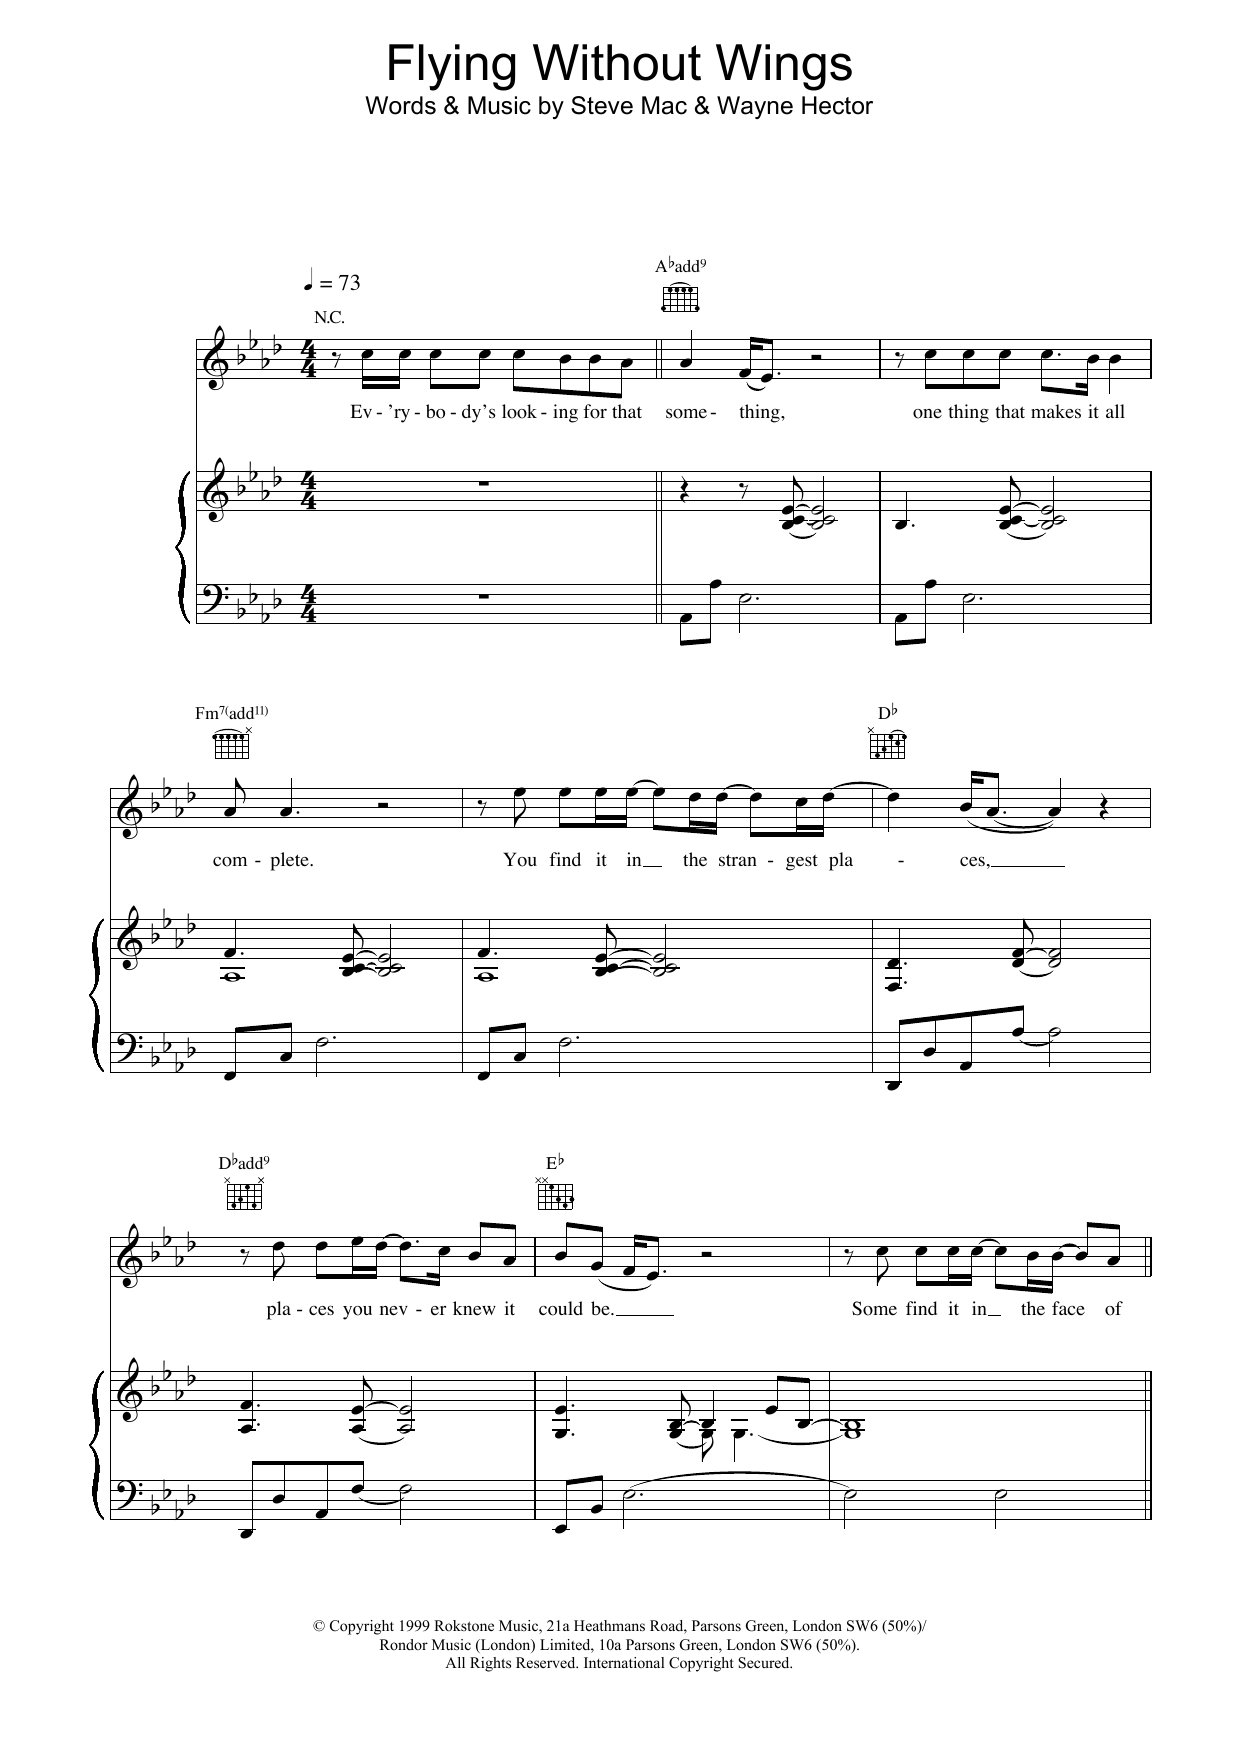 Westlife Flying Without Wings sheet music notes printable PDF score